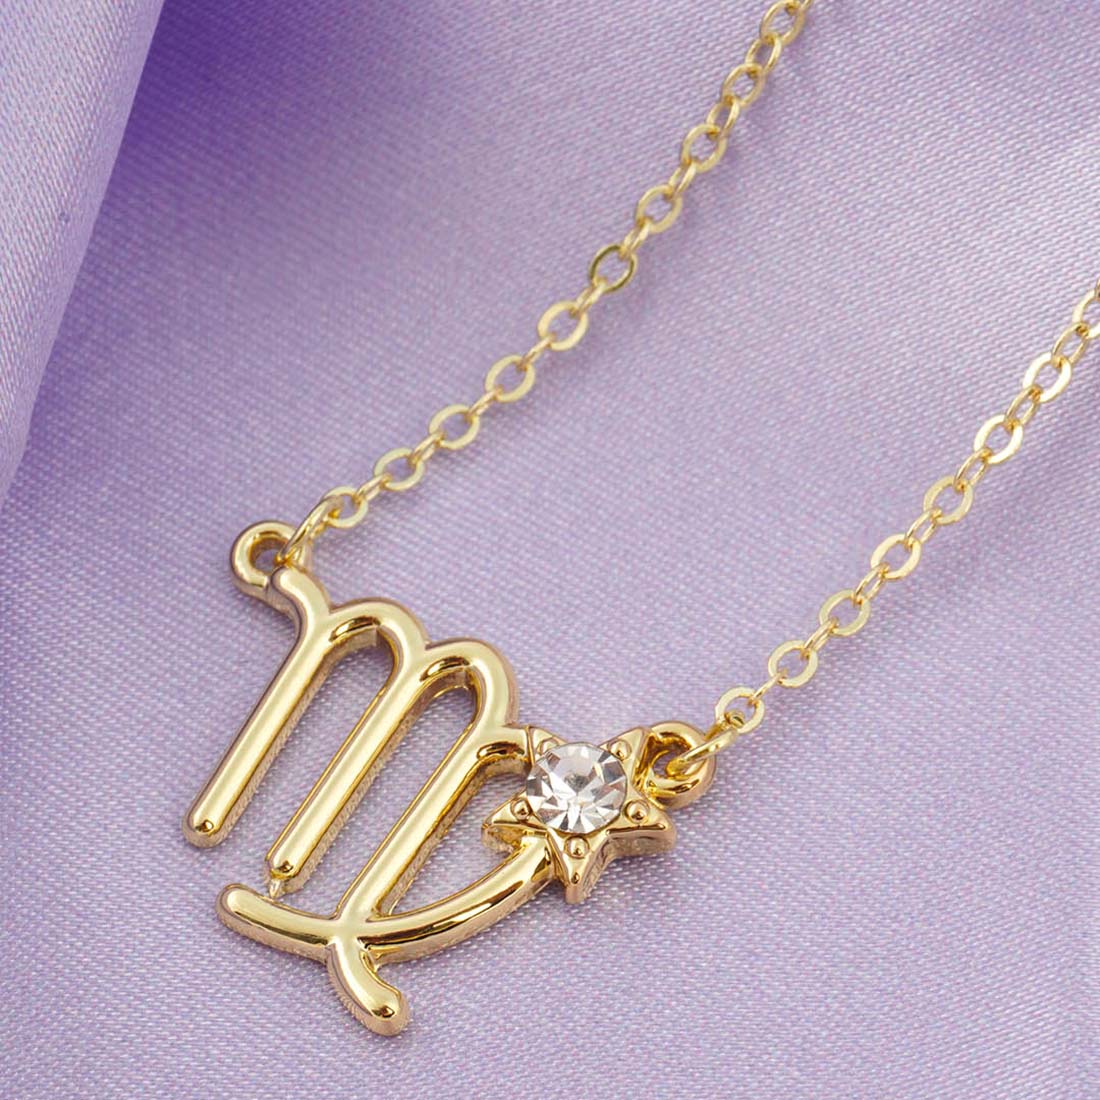 Gold-Toned Crystal Studded Star Virgo Shaped Pendant With Chain